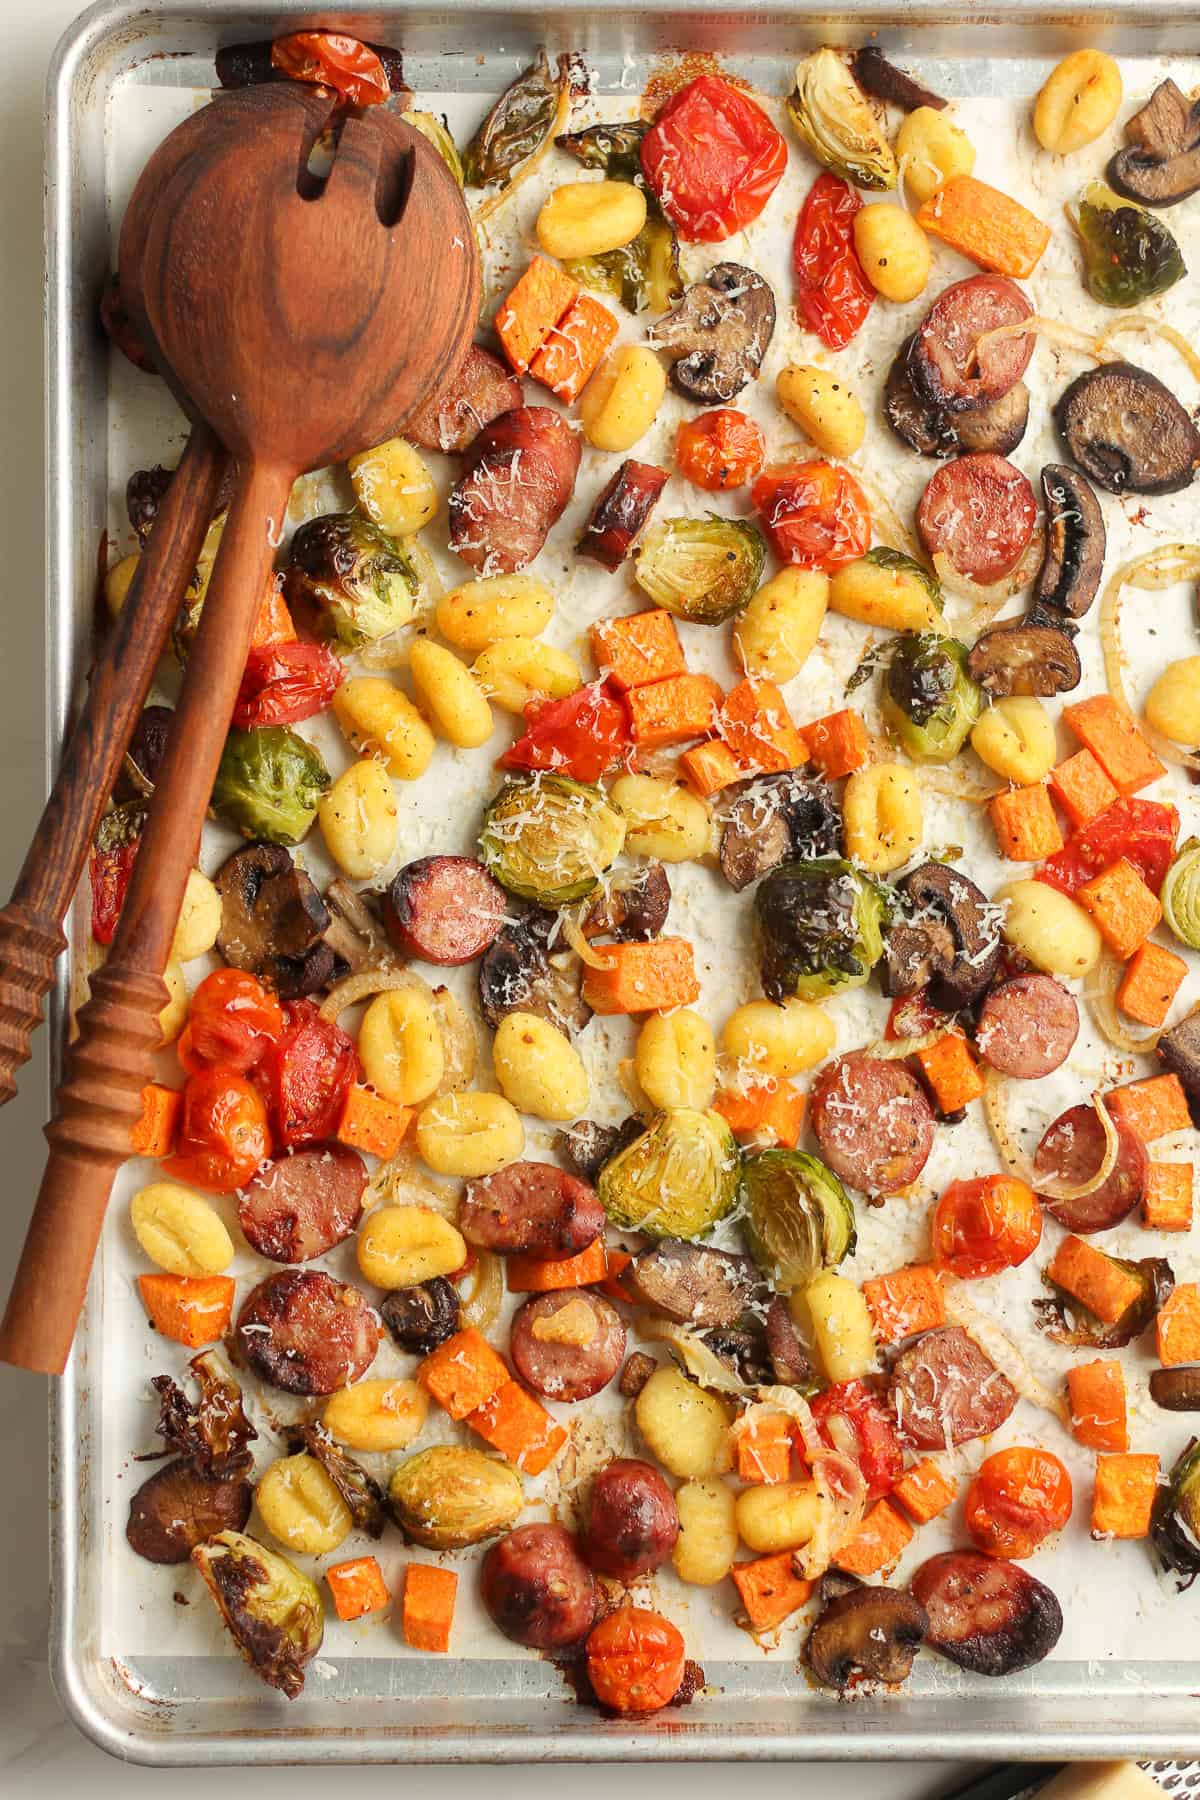 A sheet pan of the gnocchi bake with parmesan cheese on top, and two wooden spoons.